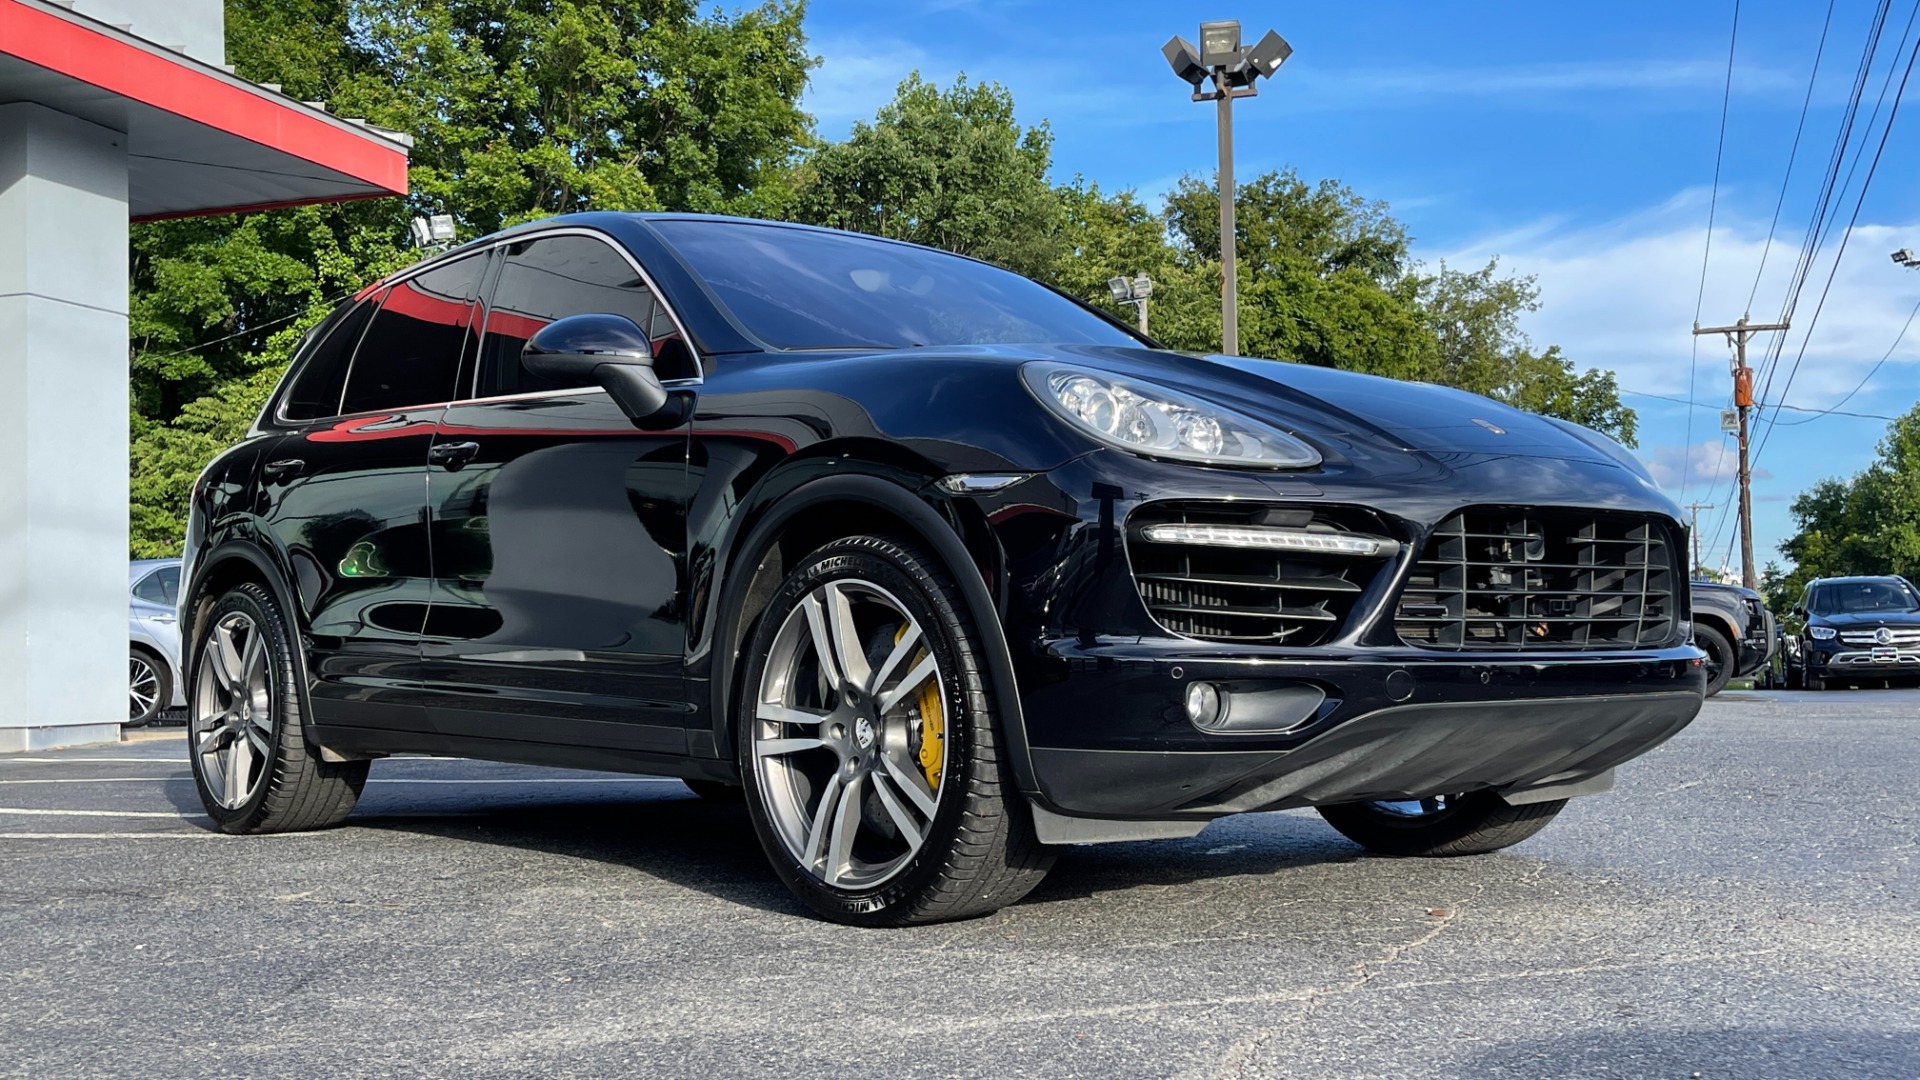 Used 2011 Porsche Cayenne Turbo / CARBON CERAMICS / CARBON FIBER TRIM / 21IN WHEELS / PREMIUM PACKAGE for sale Sold at Formula Imports in Charlotte NC 28227 42